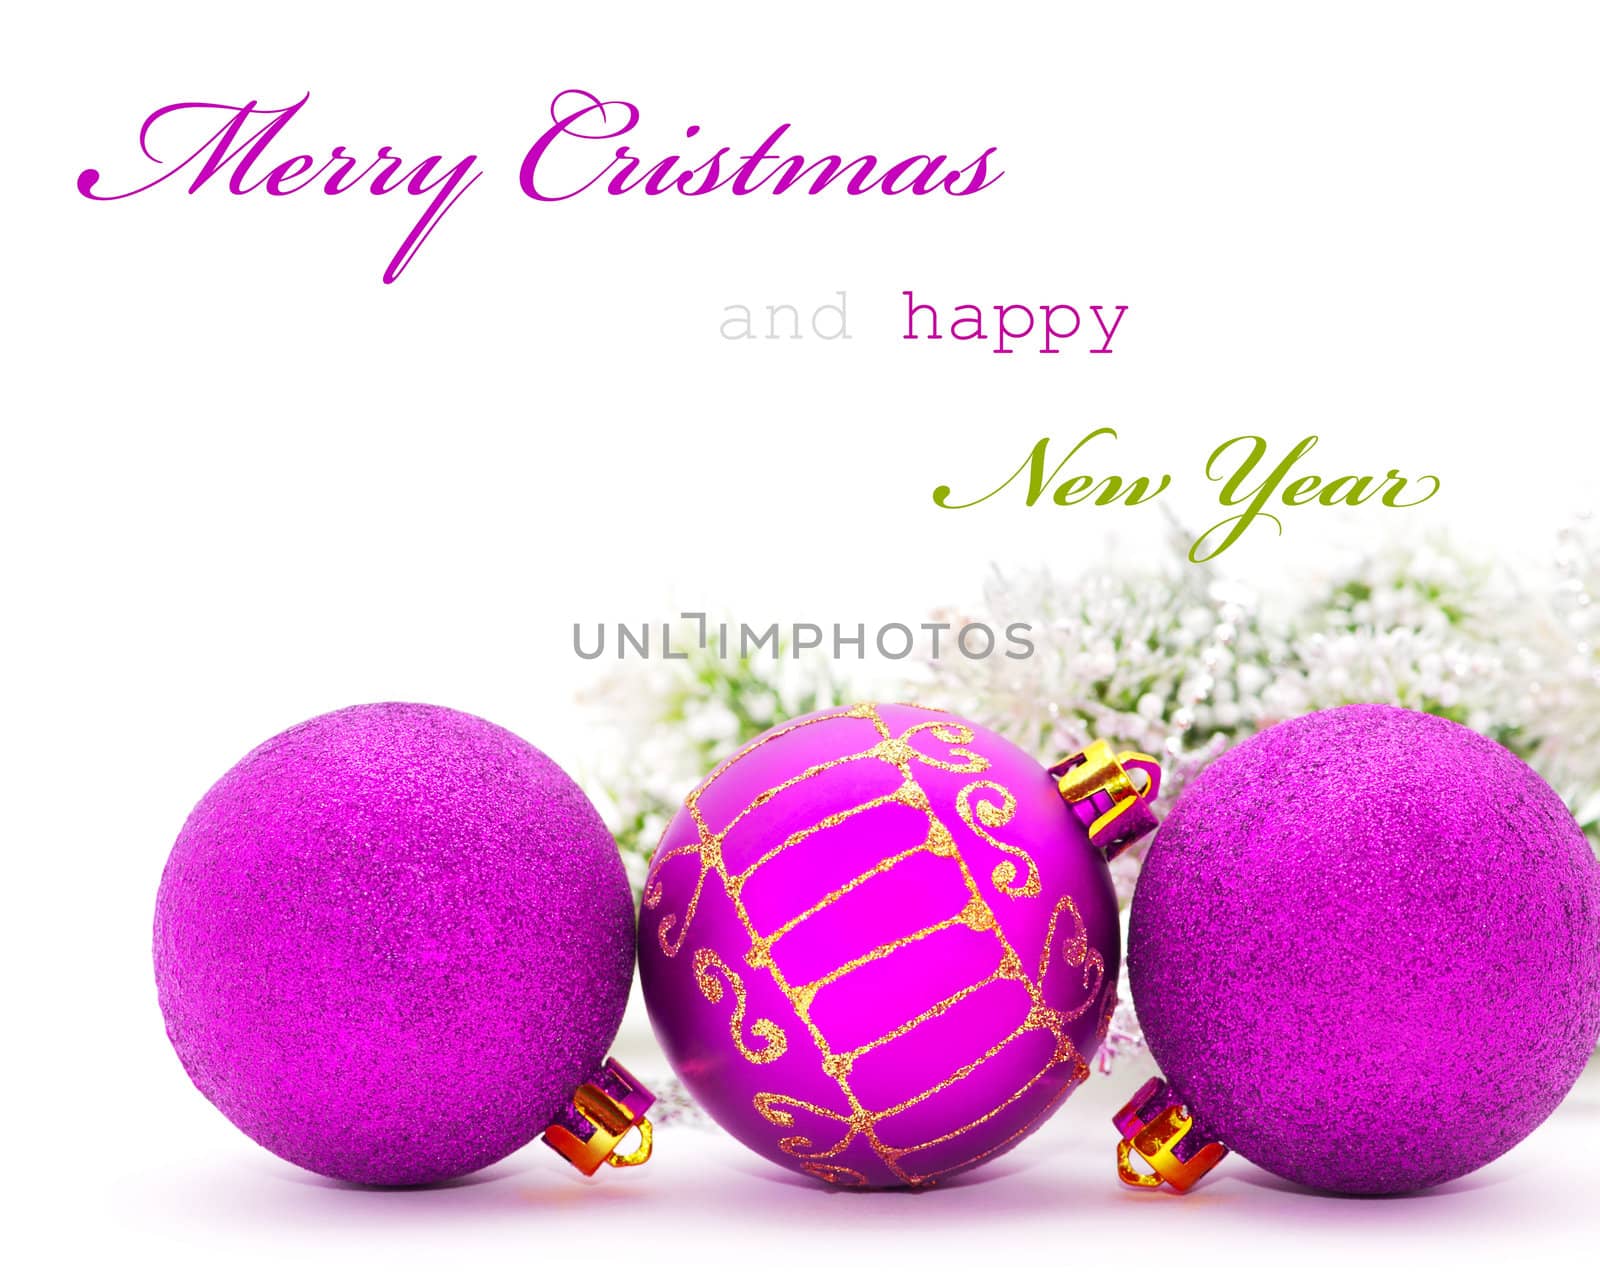 Christmas greeting card with purple baubles and sample text